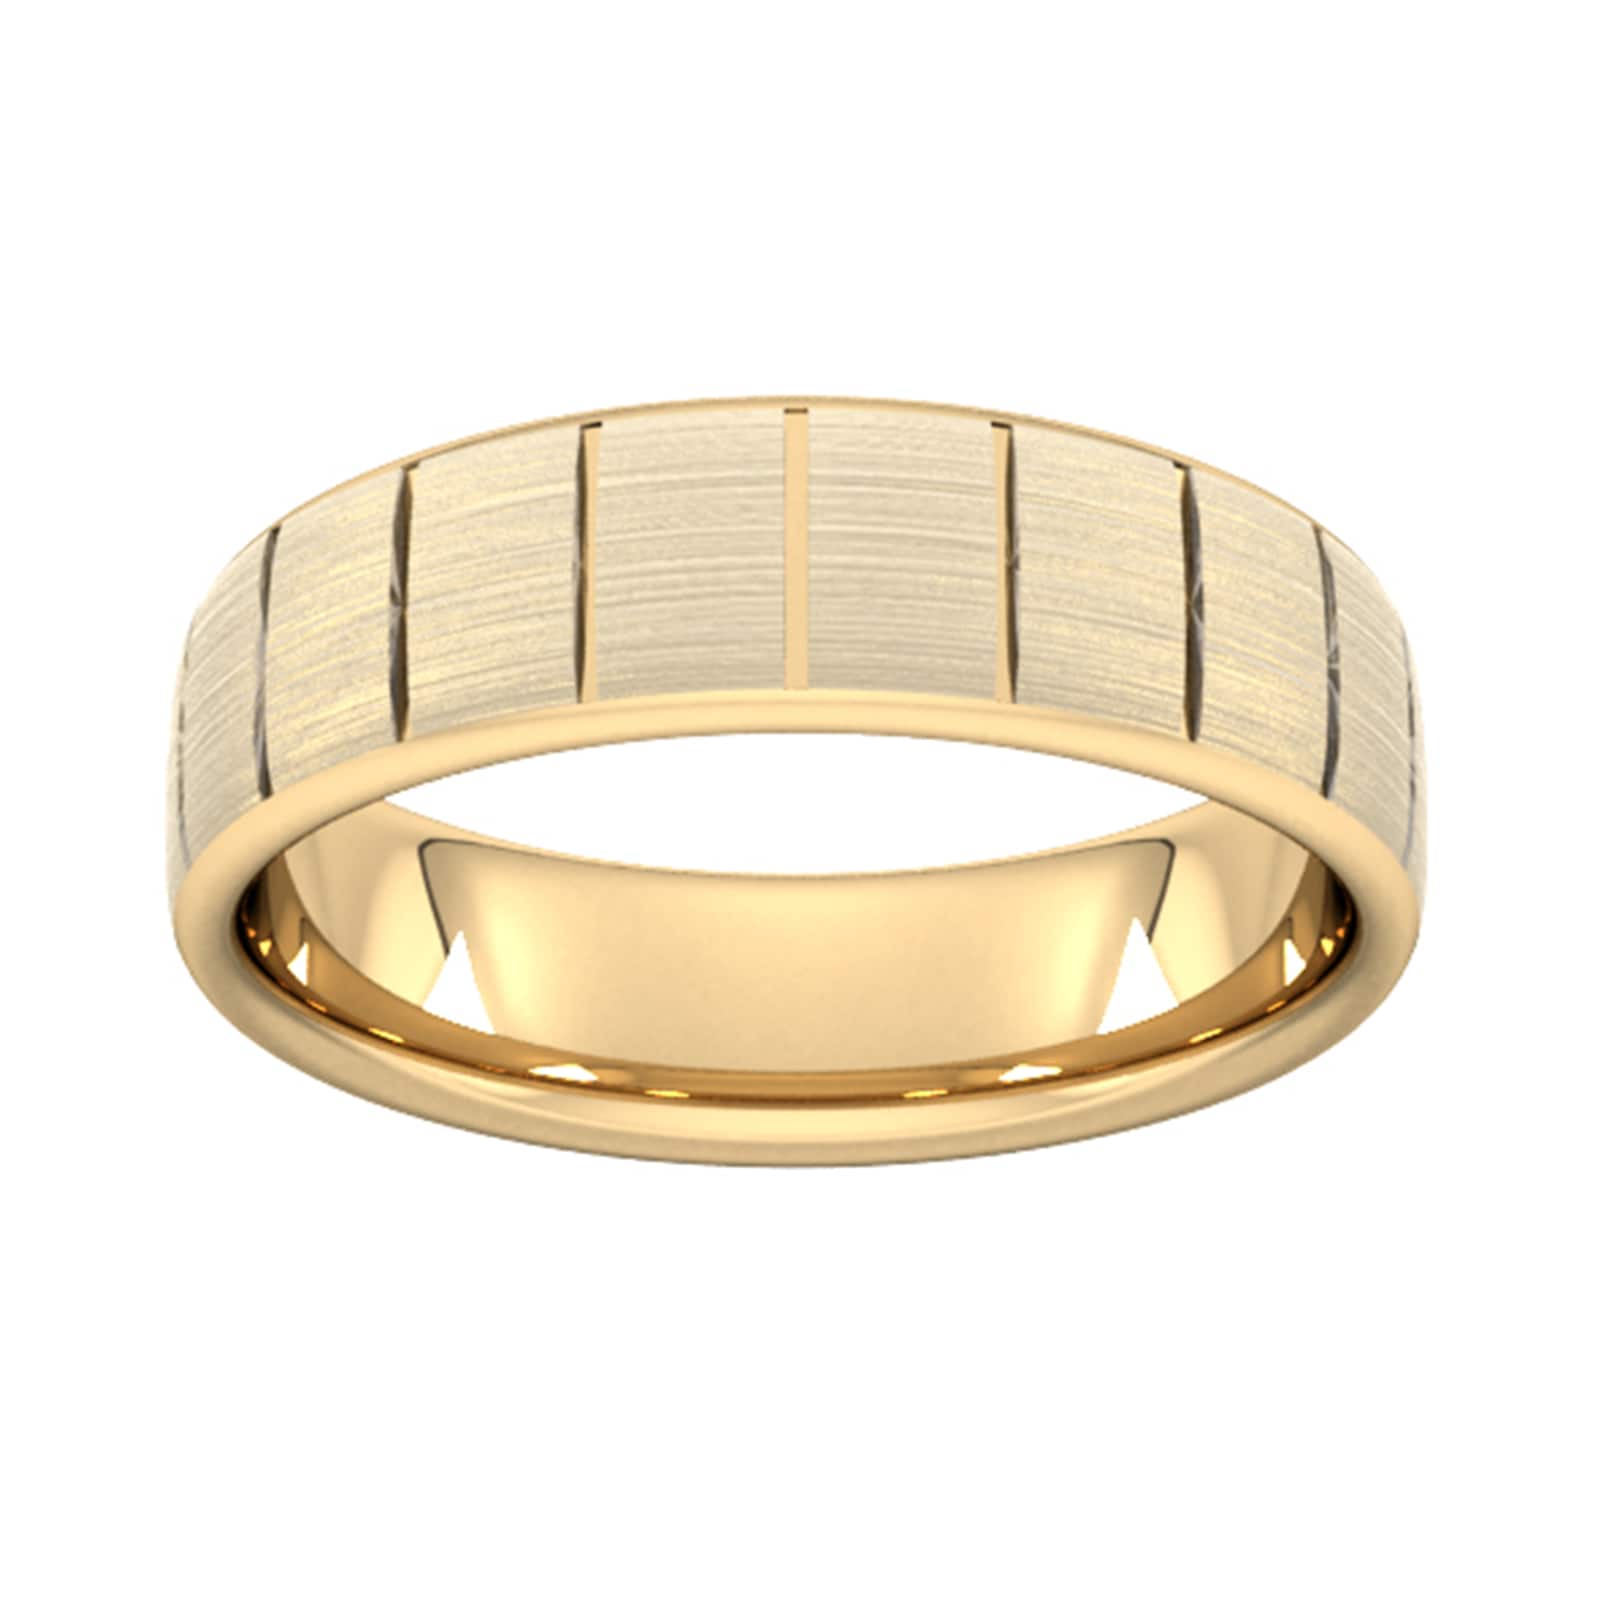 6mm Slight Court Heavy Vertical Lines Wedding Ring In 18 Carat Yellow Gold - Ring Size J